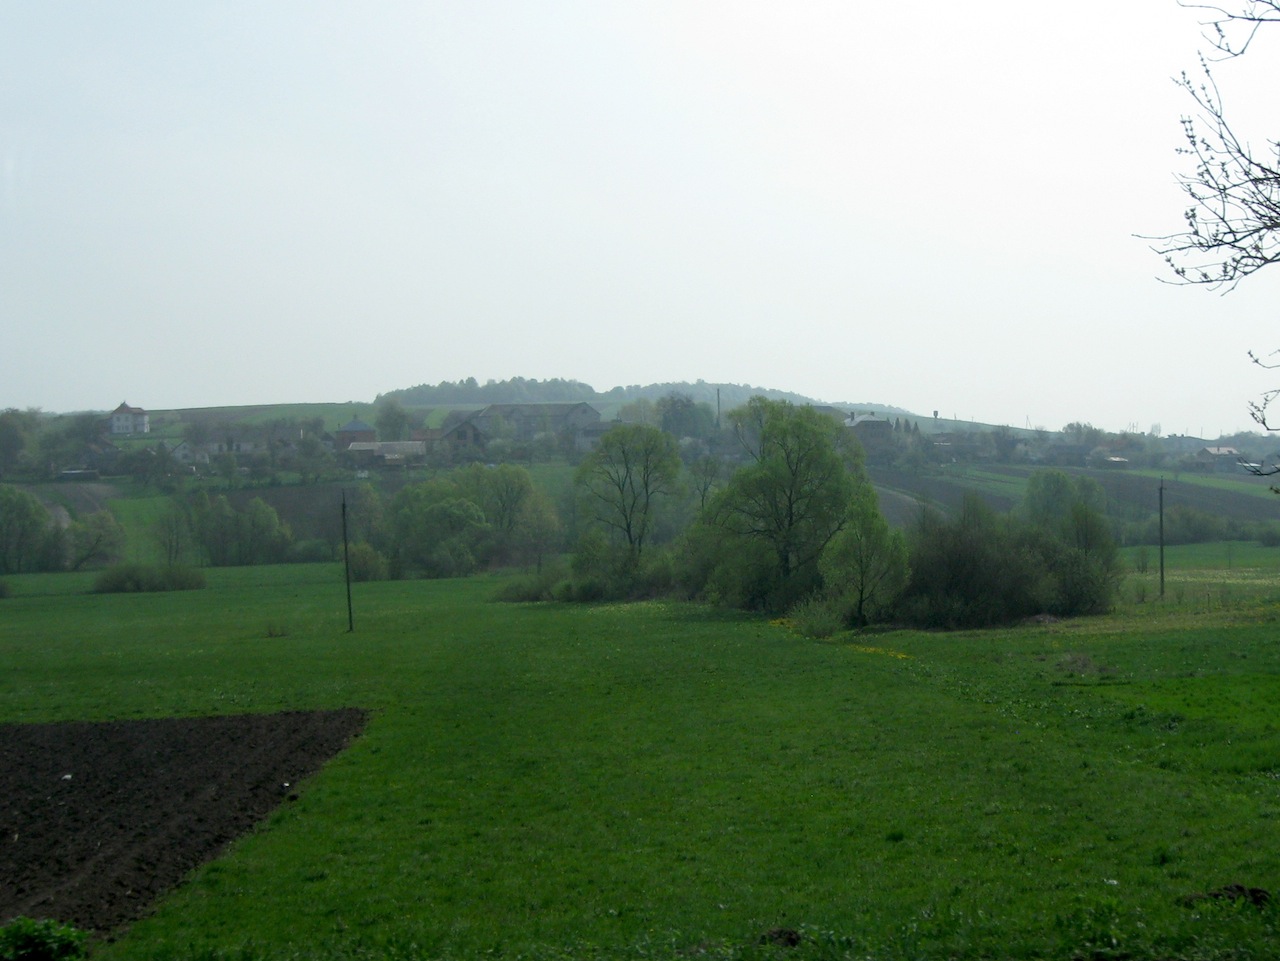 but the countryside is green and lush as we approach Rohatyn this Spring